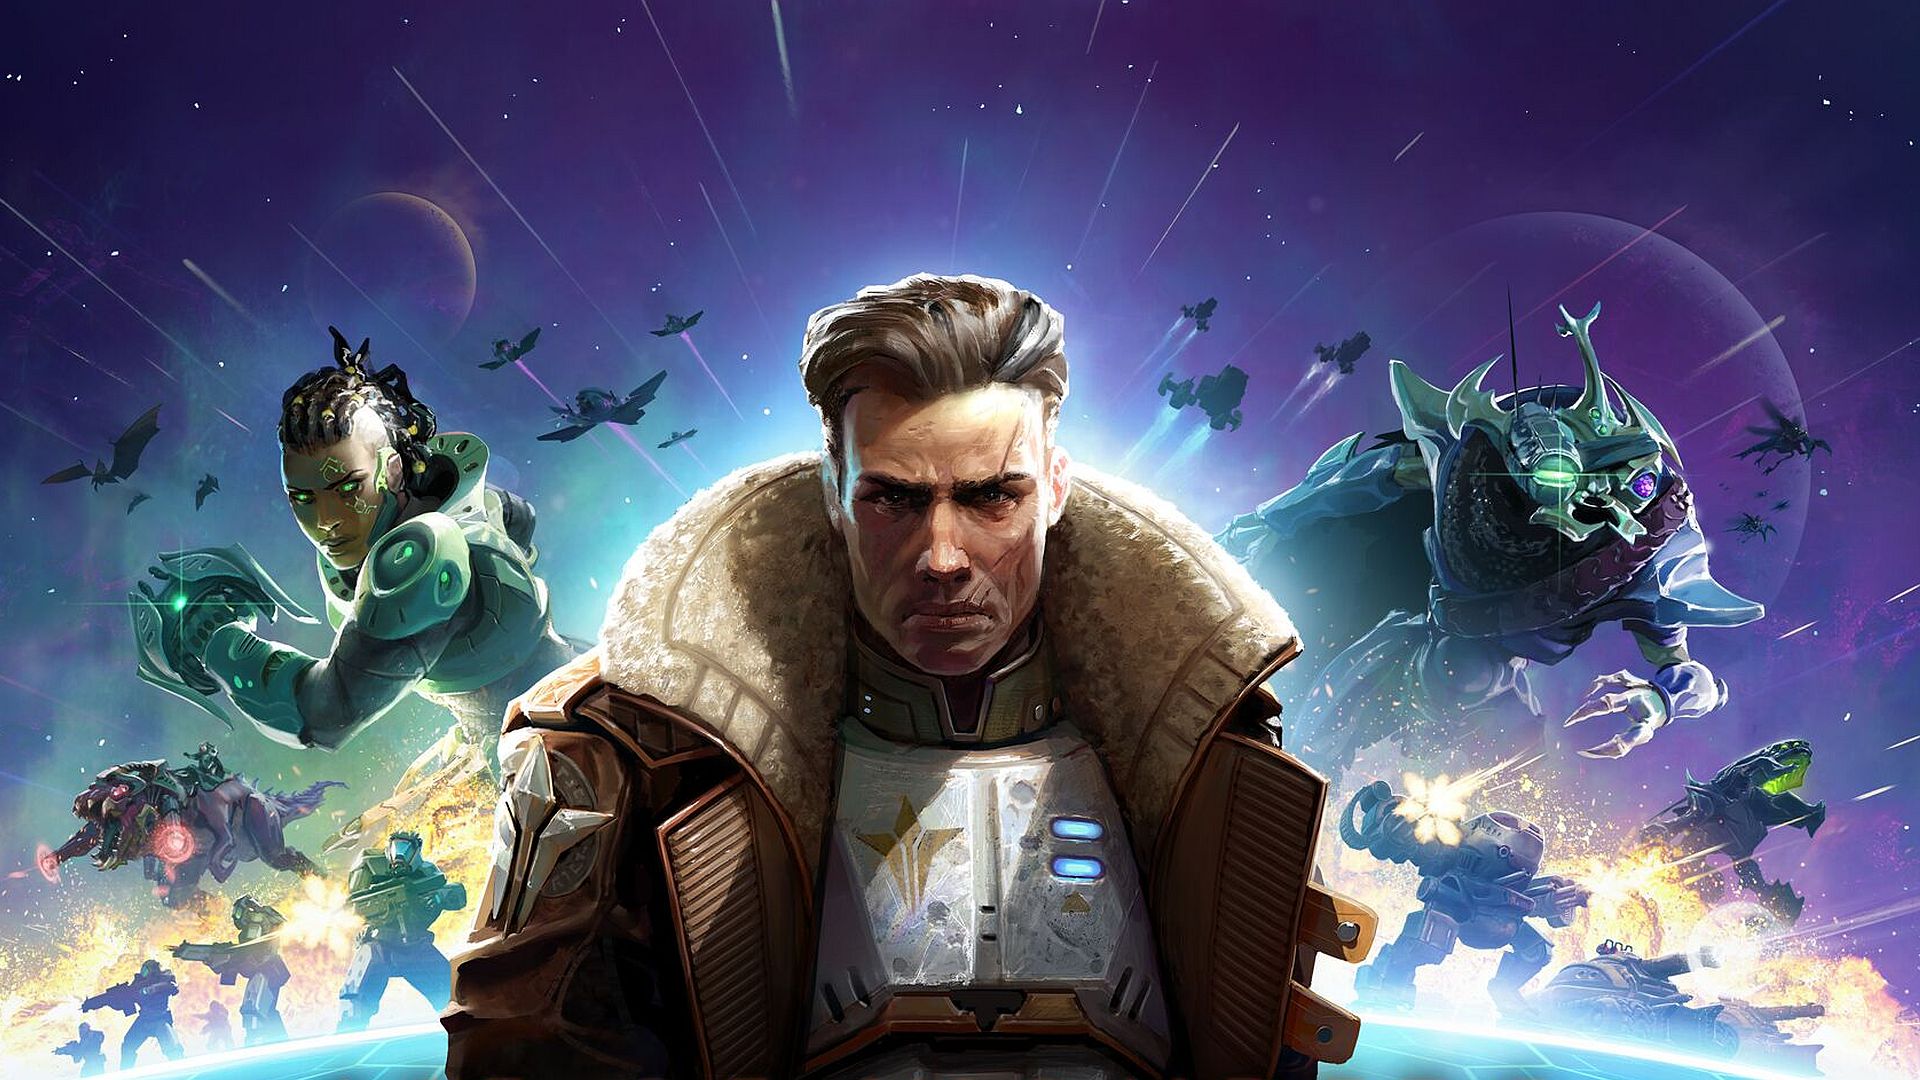 age of wonders: planetfall deluxe edition review